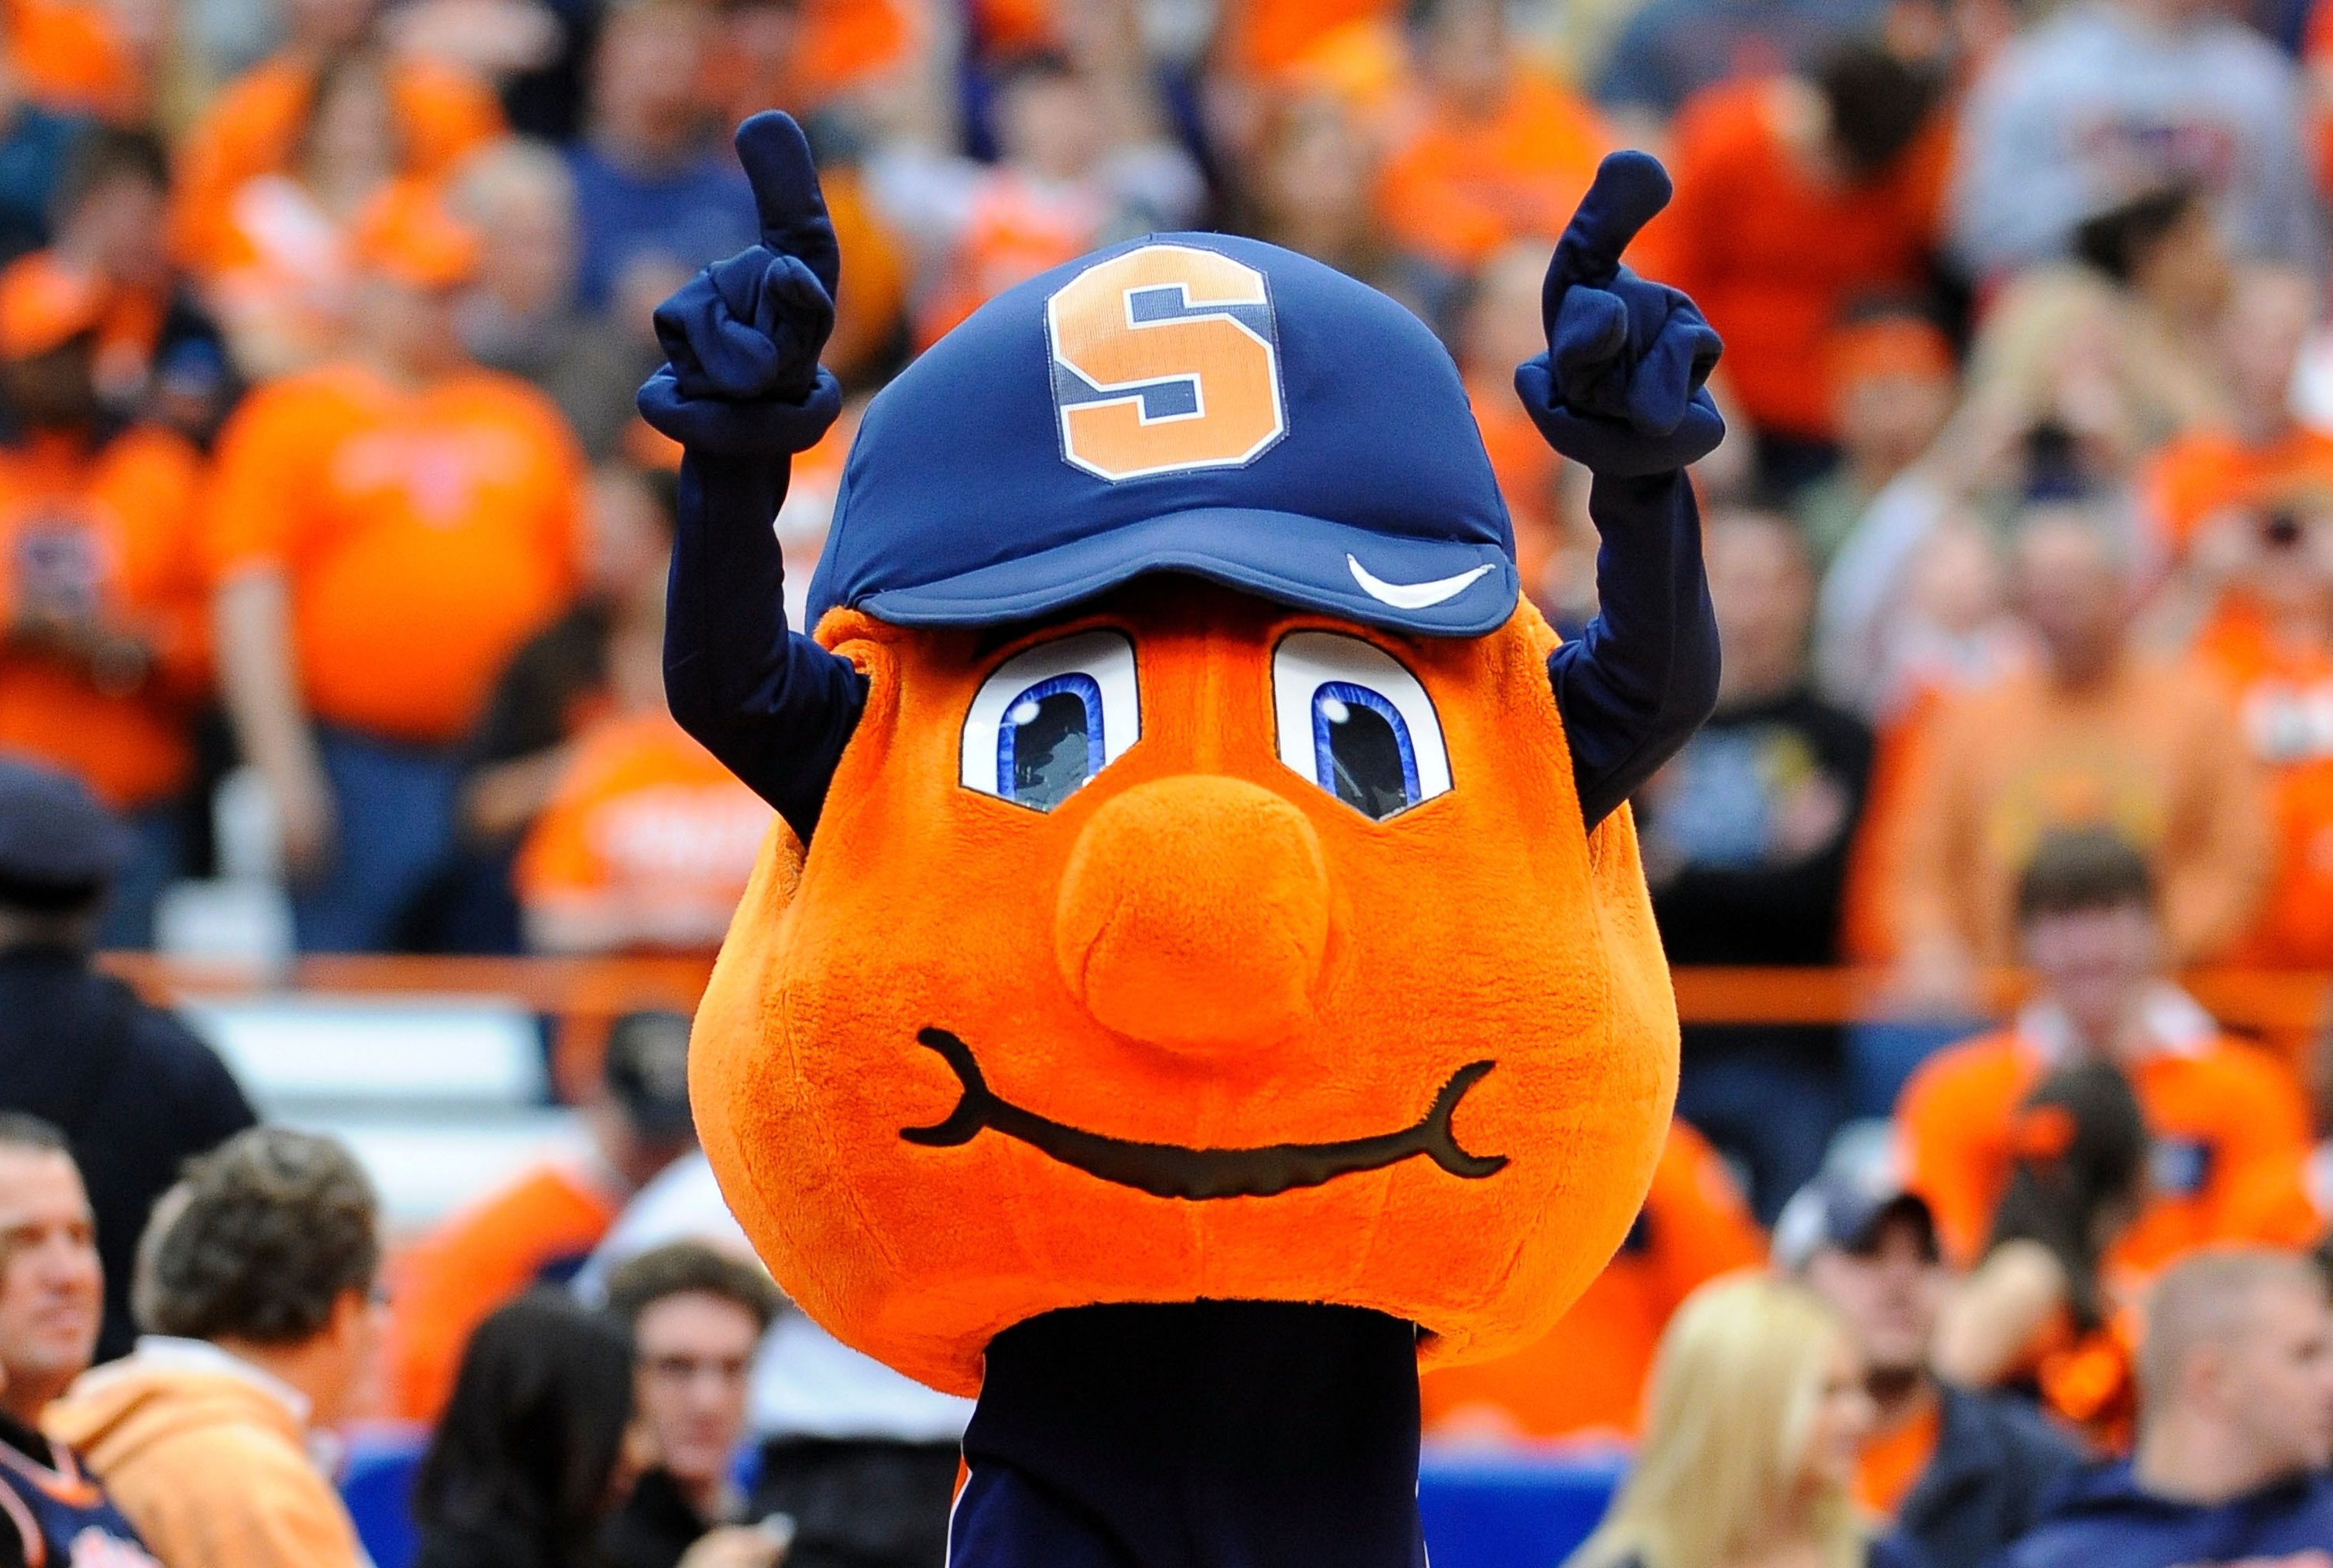 14 Fun Facts about the Orange's Hall of Famer Mascot 